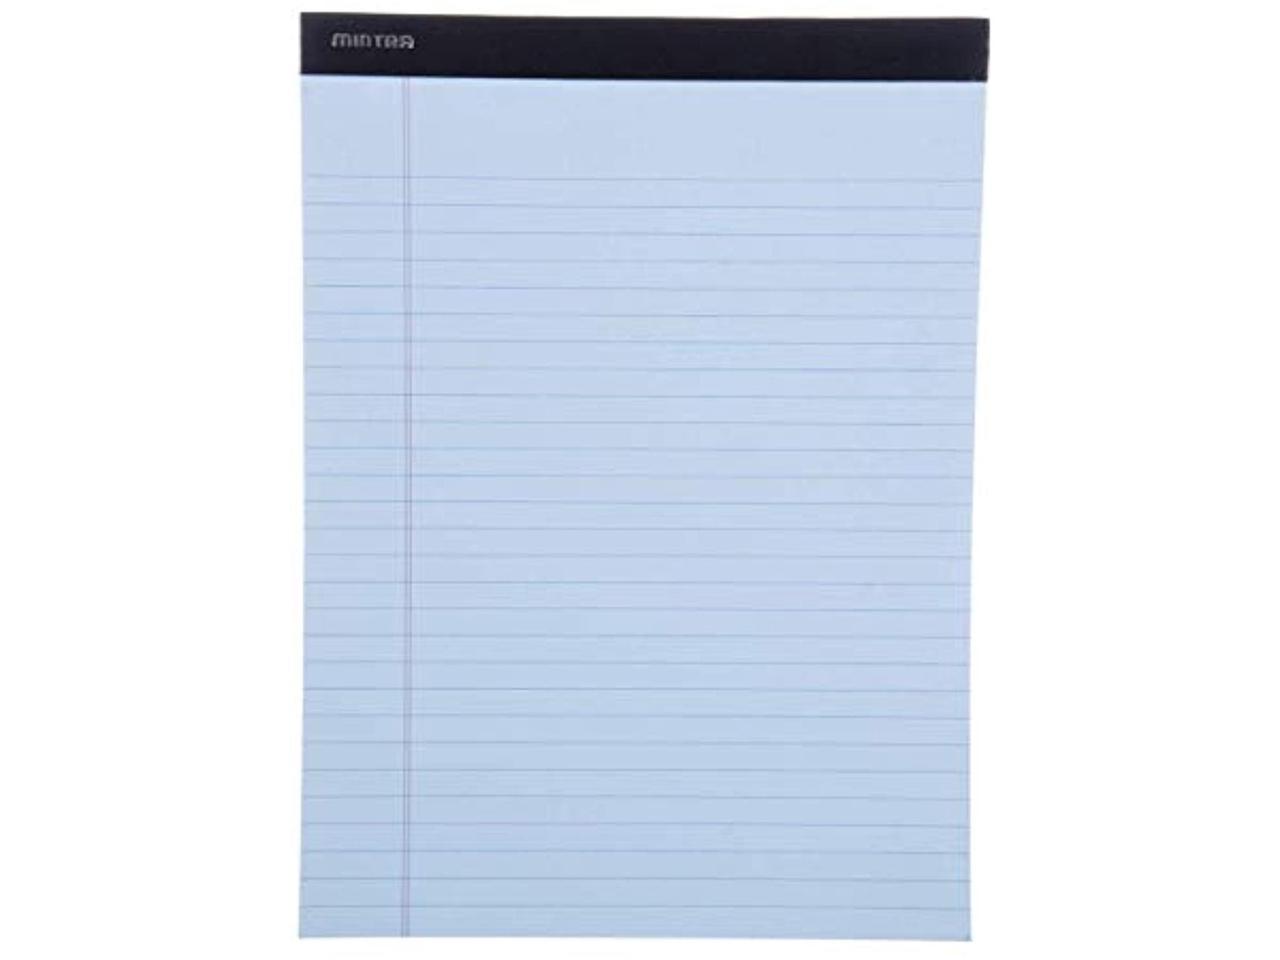 Micro perforated Writing Pad PREMIUM CANARY 6pk, 8.5in x 11in, NARROW RULED Mintra Office Legal Pads - Professional Office College - 50 Sheets per Notepad Notebook Paper for School 